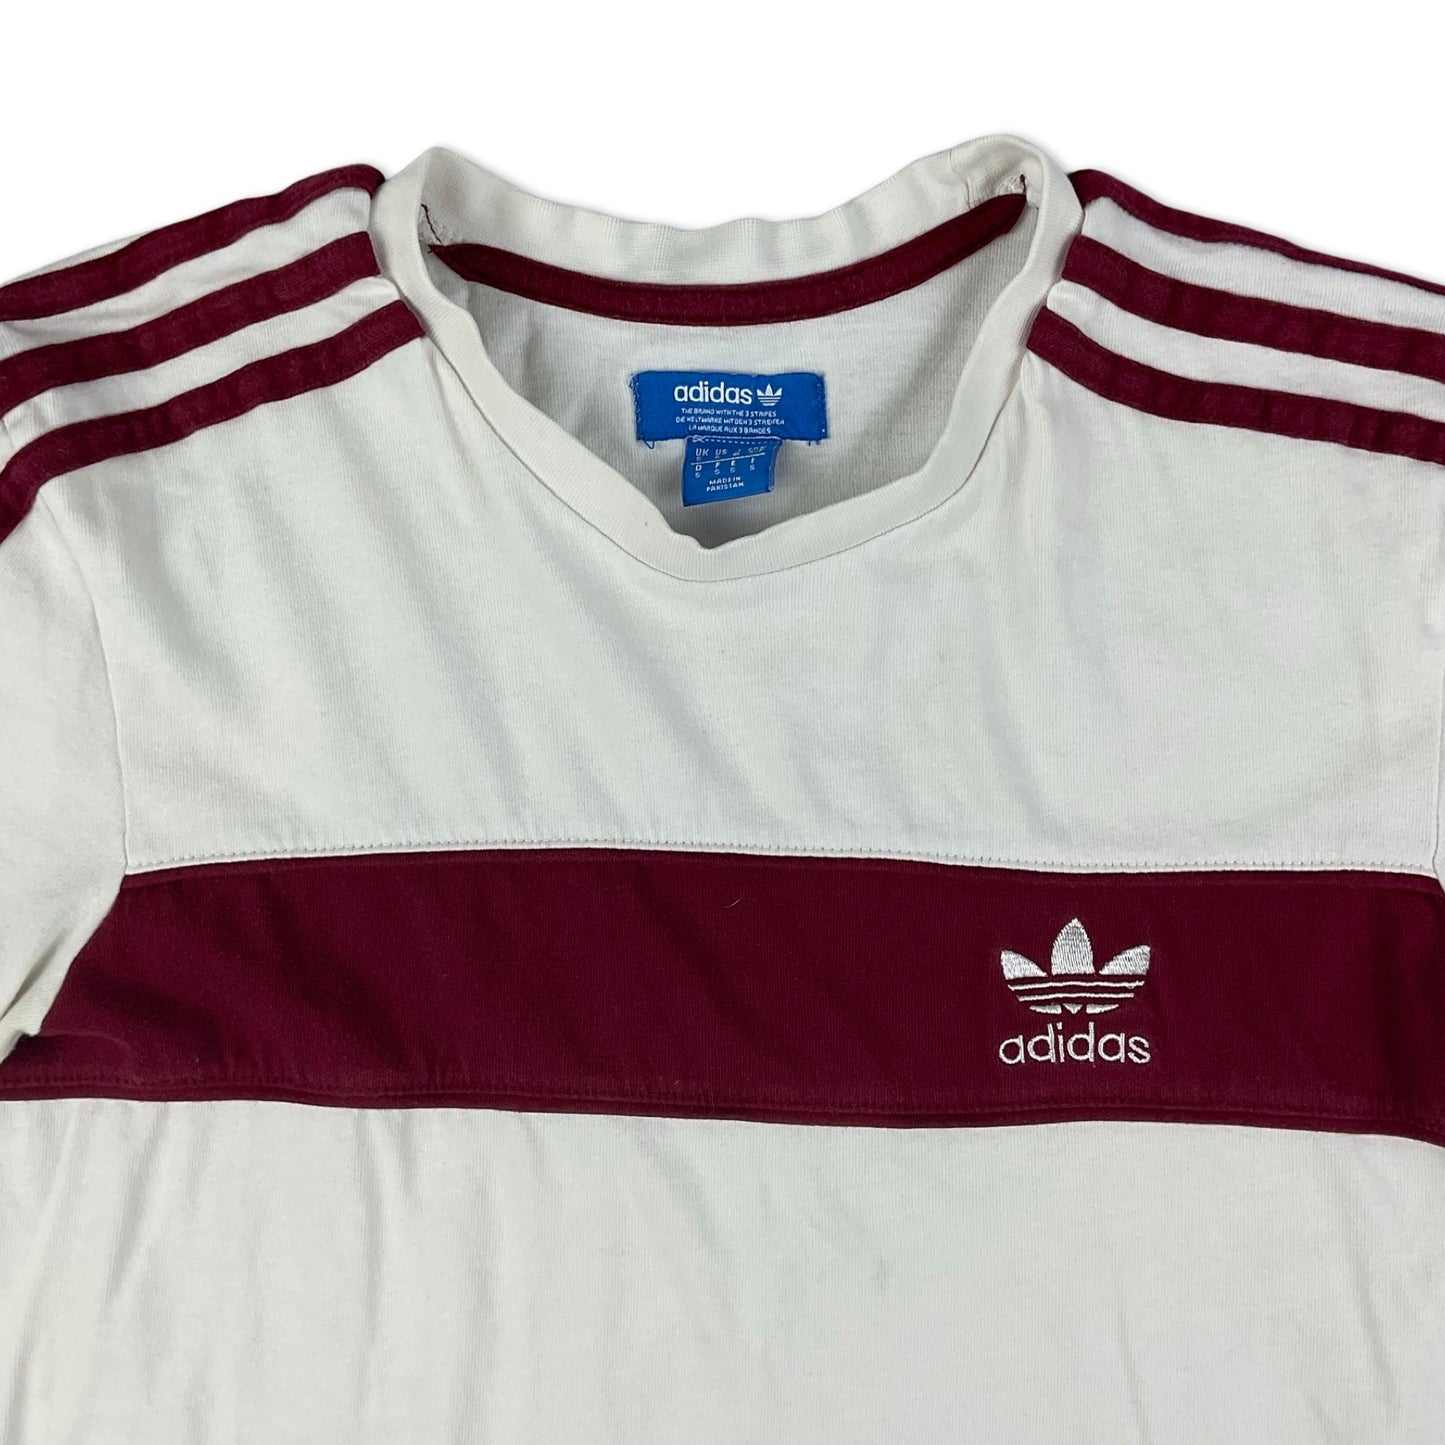 Adidas Red and White Tee XS